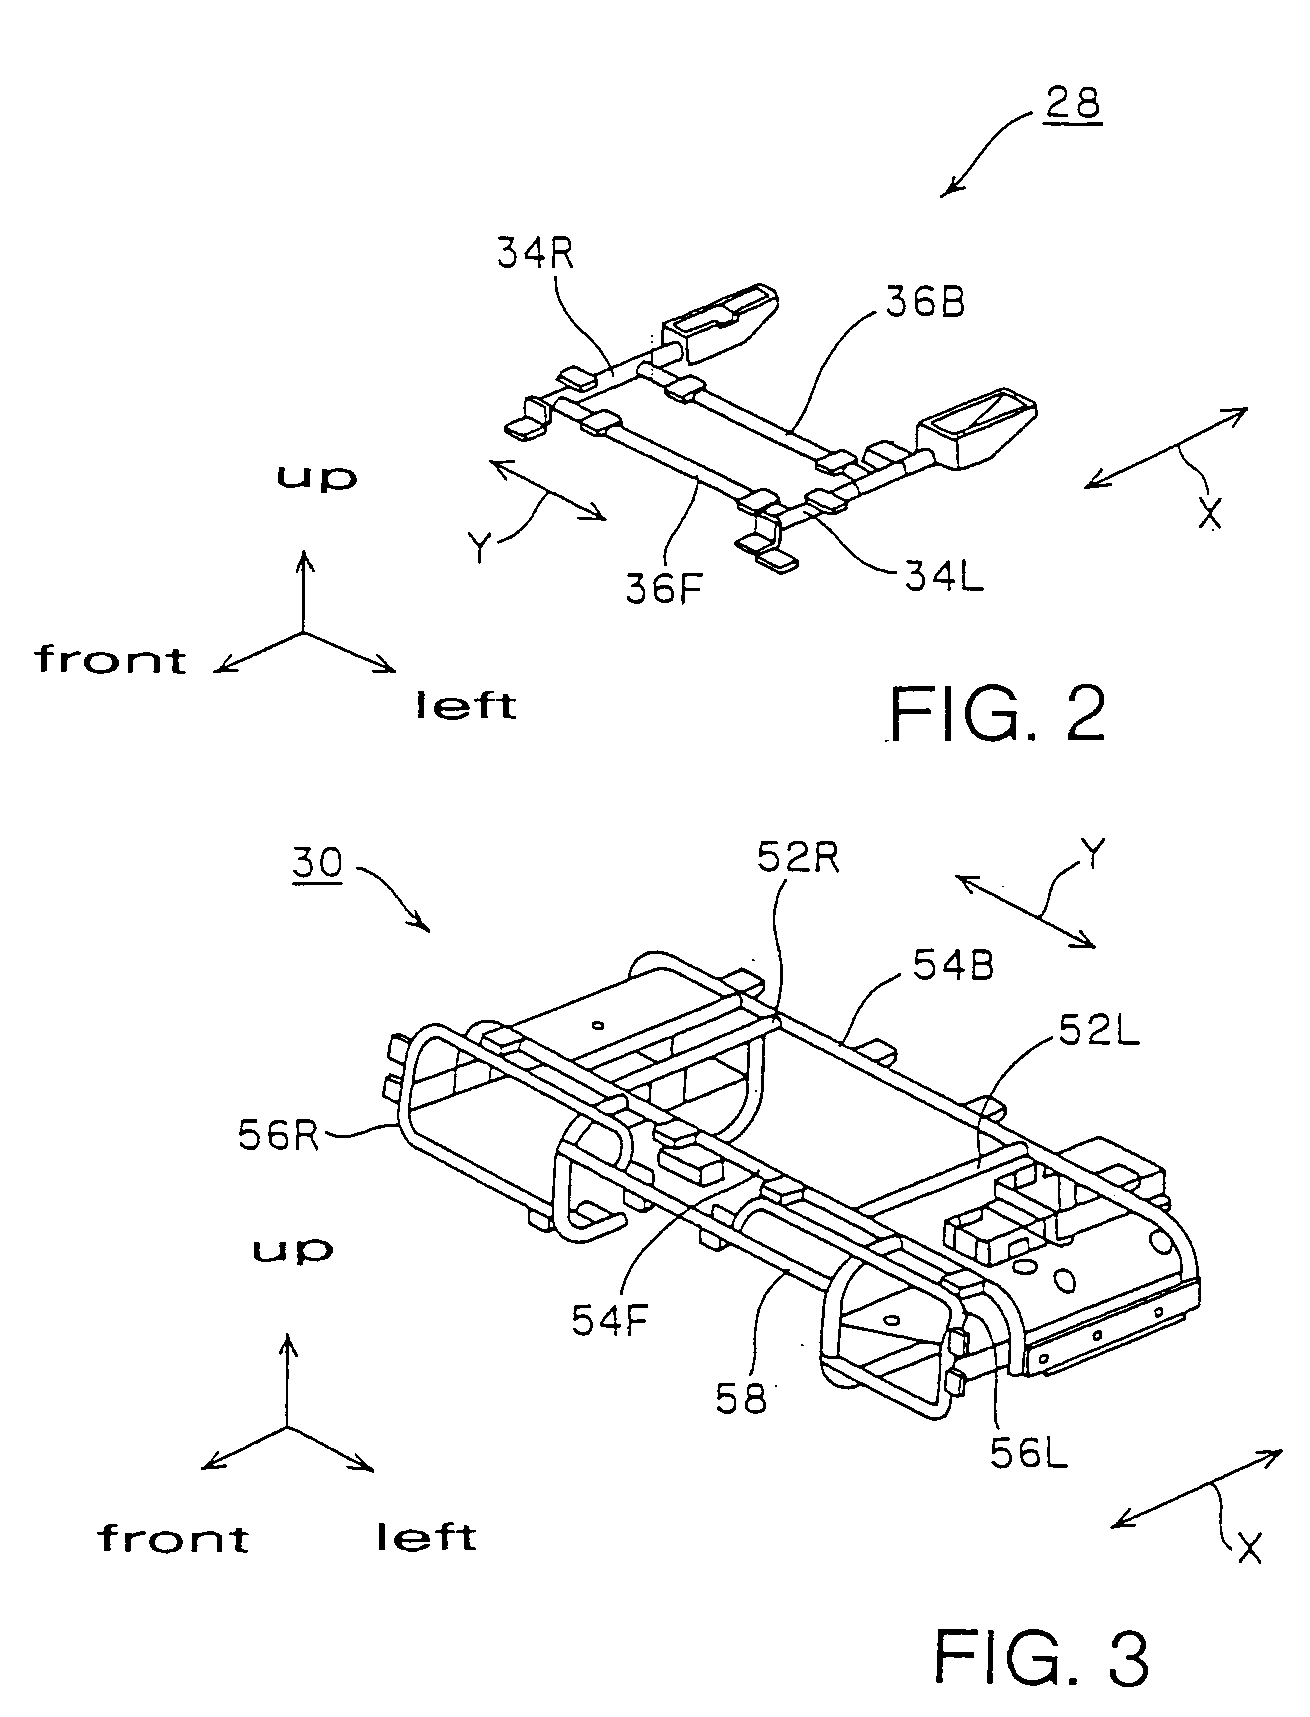 Apparatus for attaching electrical components to a vehicle